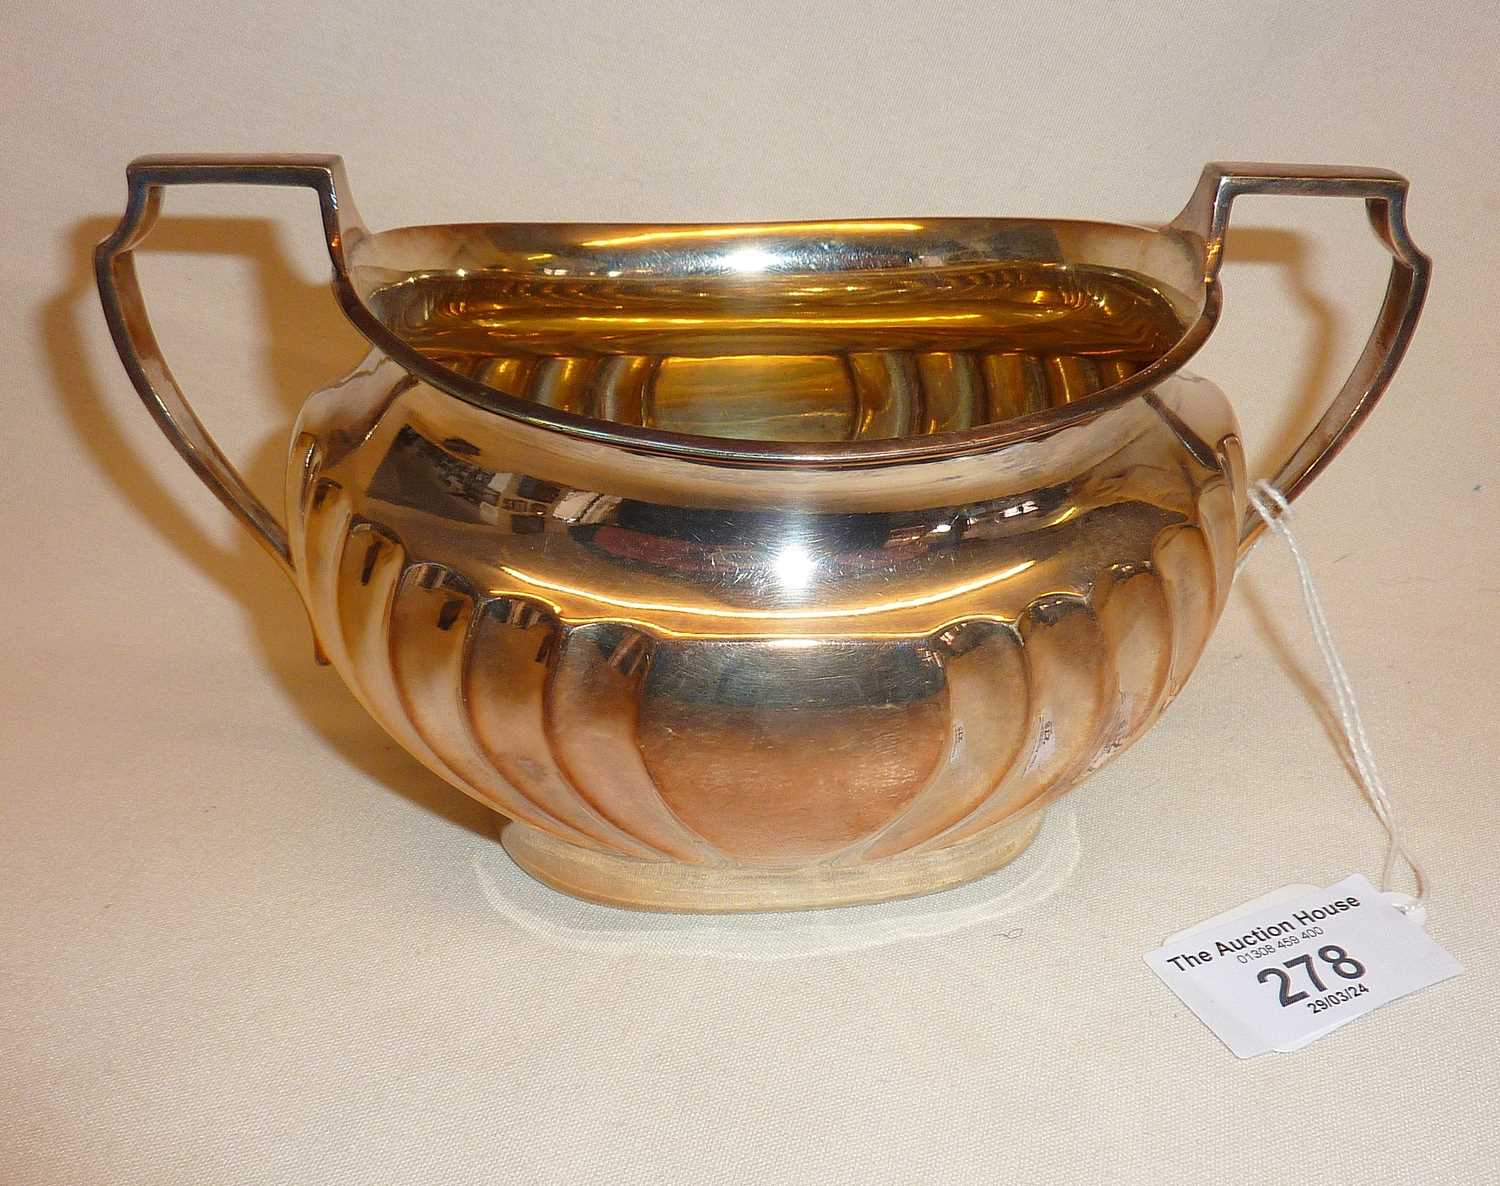 Harrod's silver-plated sugar bowl, approx. 17.5cm wide - Image 2 of 2